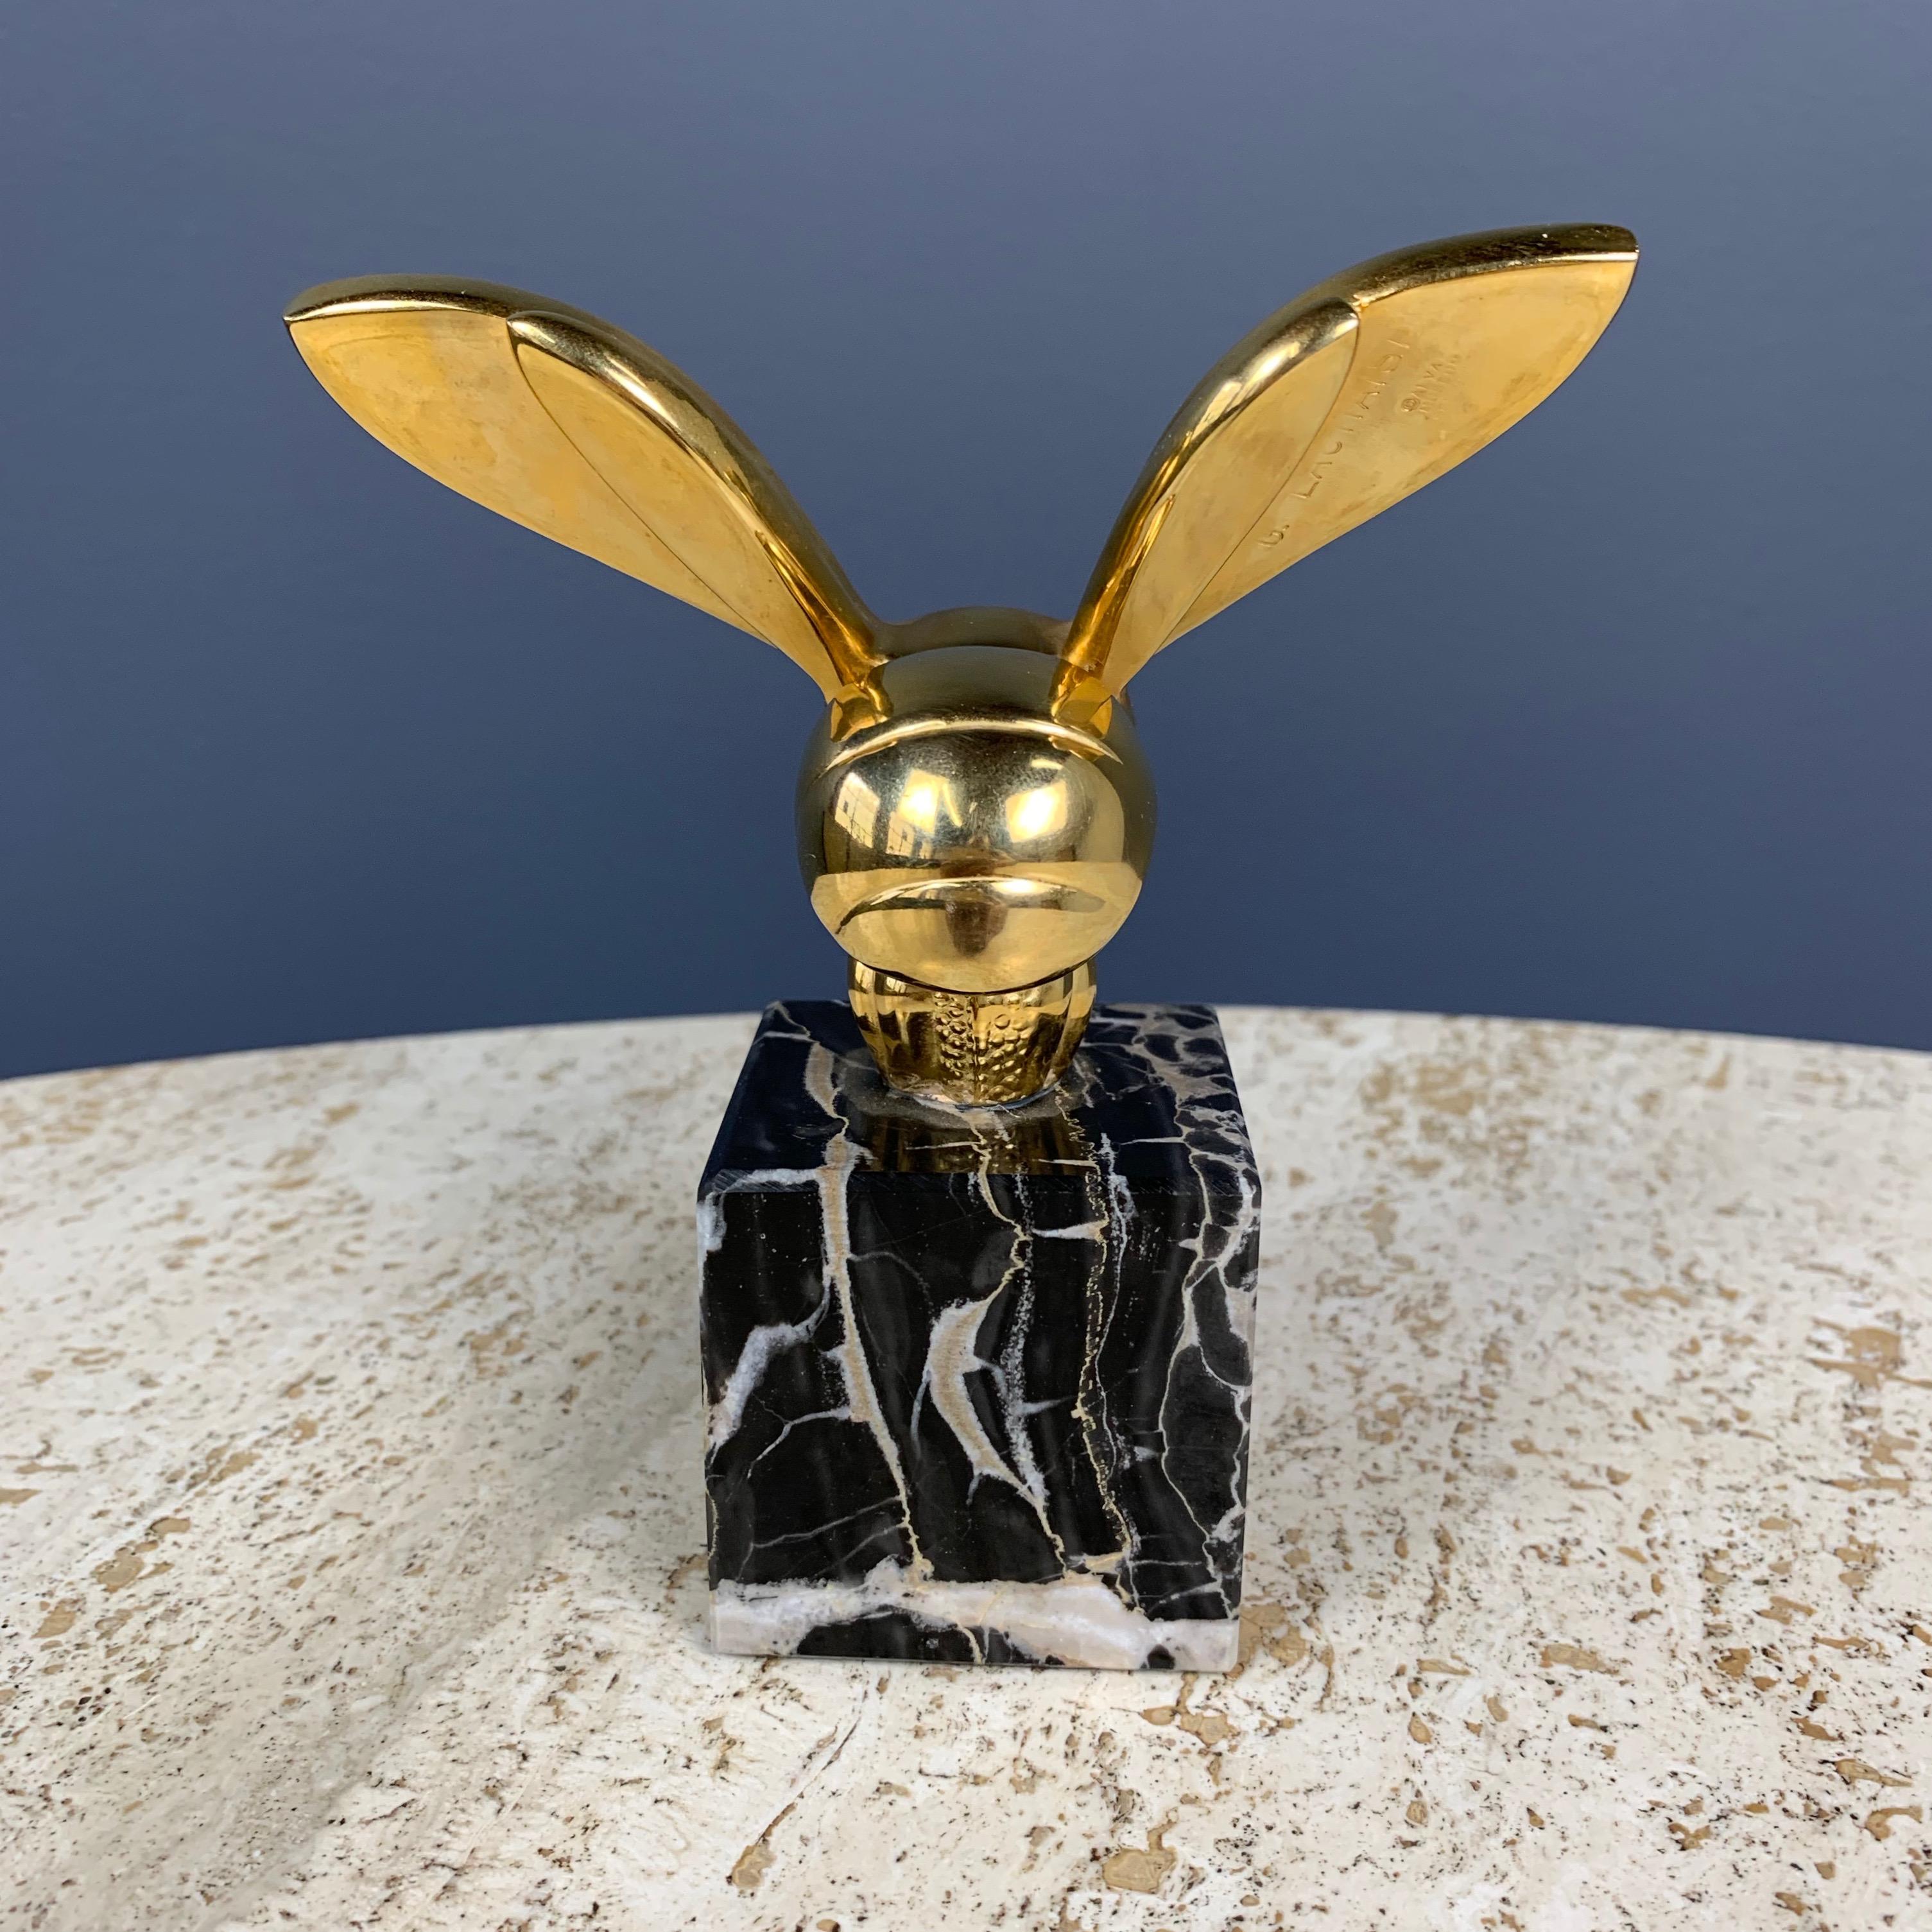 This sculpture of a Bee in brass on a marble base is an authorized museum replica by Alva Studios and was produced in the late 1970s. The original by Gaston Lachaise is in the Philadelphia. Museum of Art.